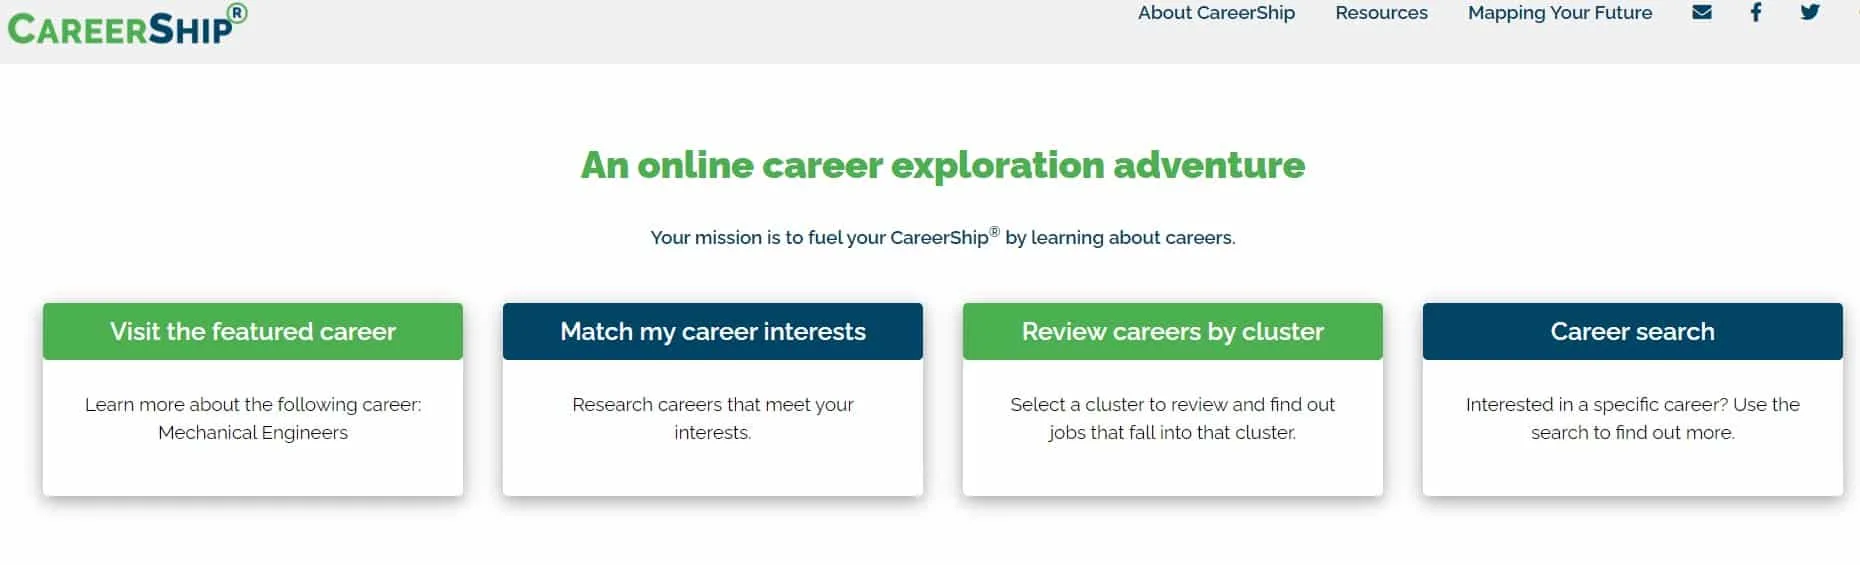 Explore Research Careers Online without Ads